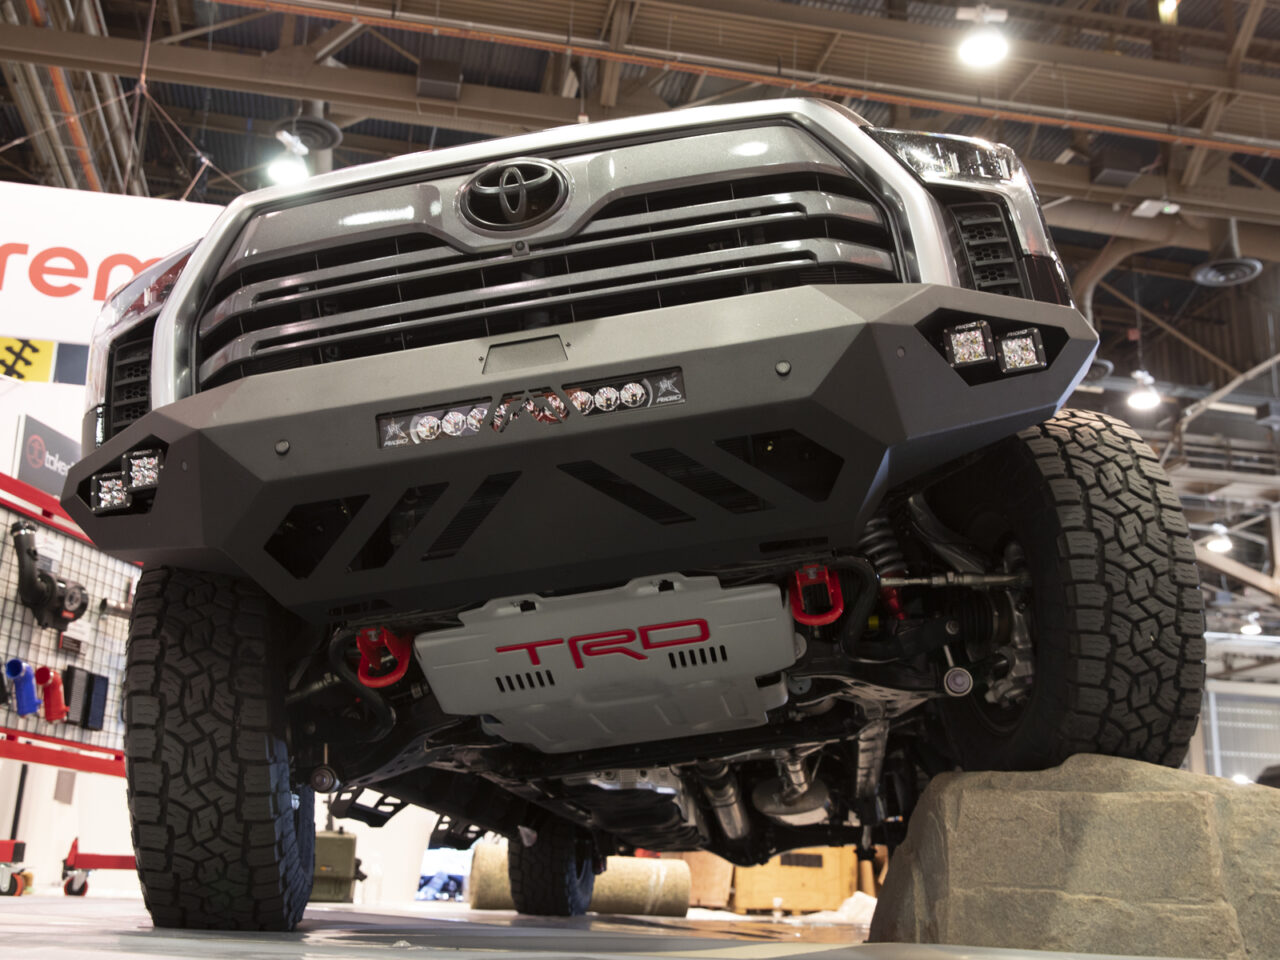 Lower view of Toyota Tundra aftermarket bumper at car show